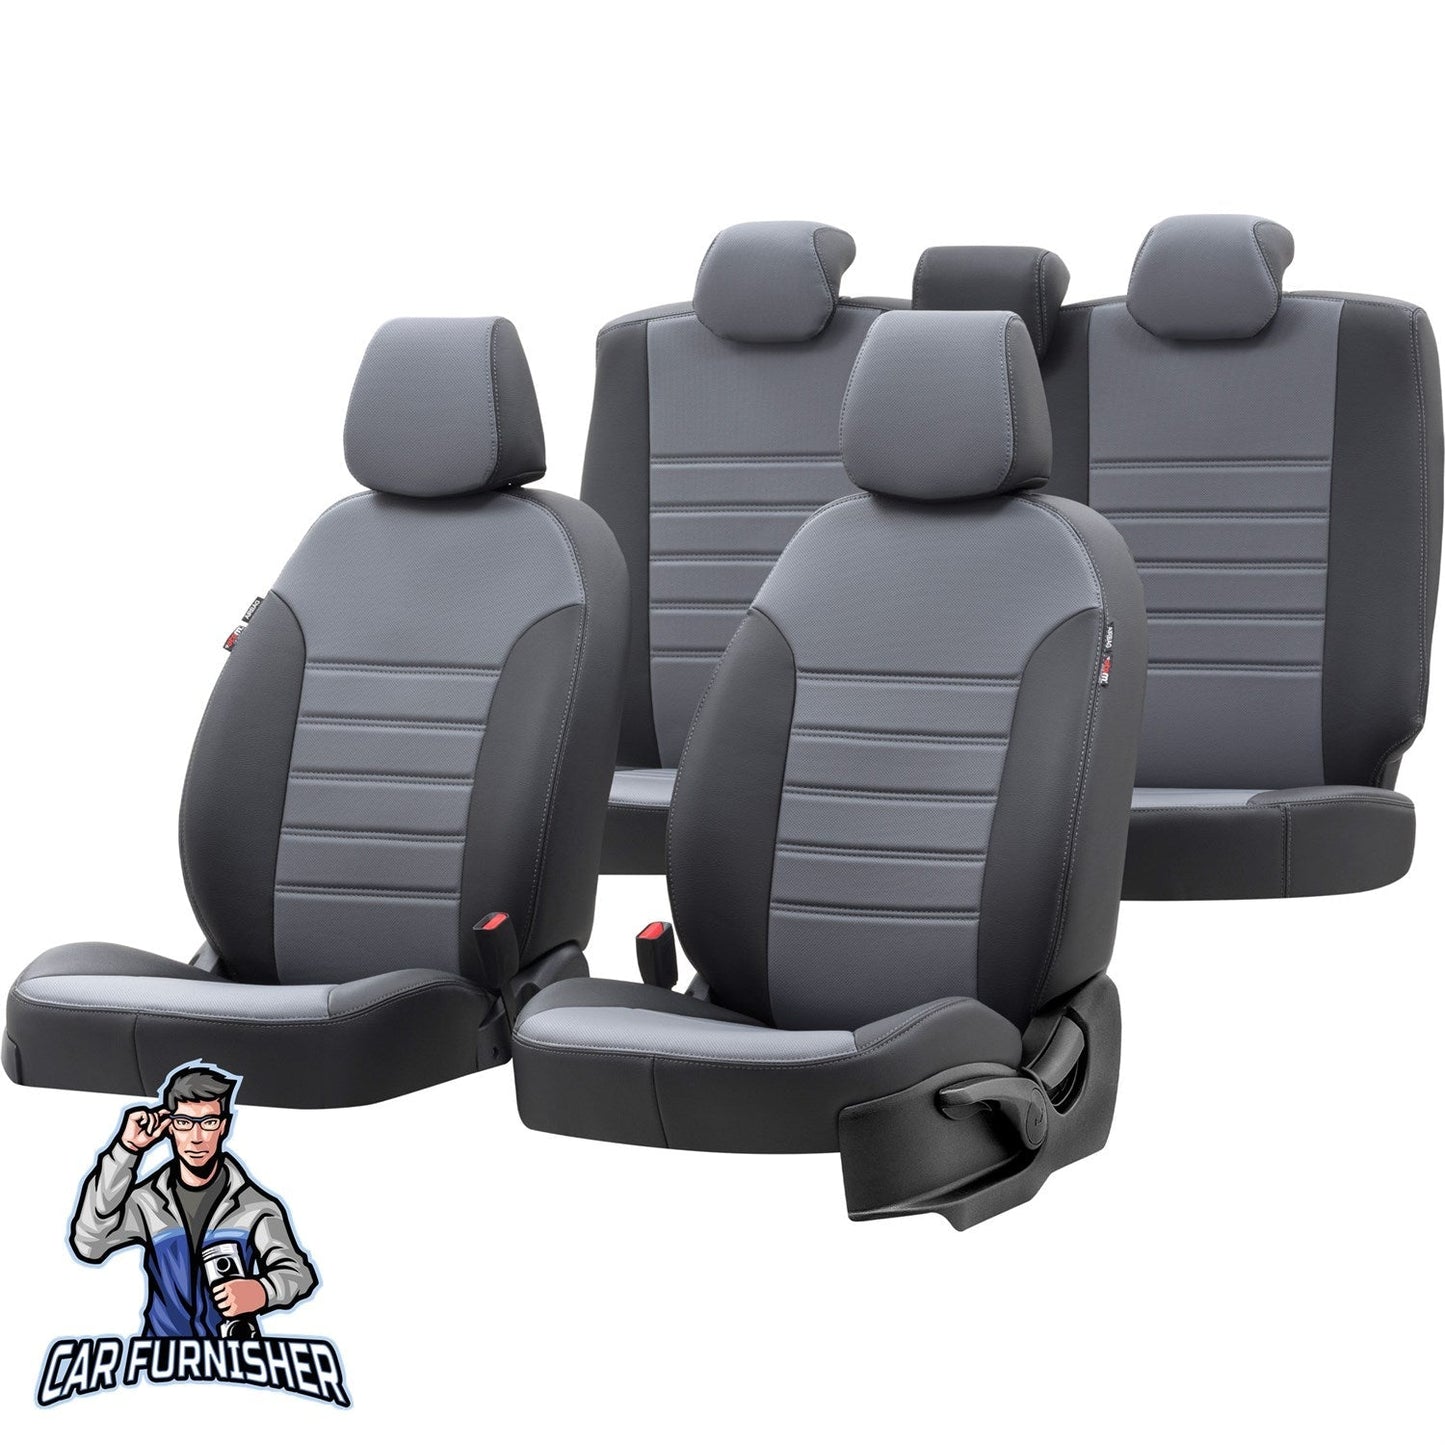 Renault Safrane Seat Covers Istanbul Leather Design Smoked Black Leather